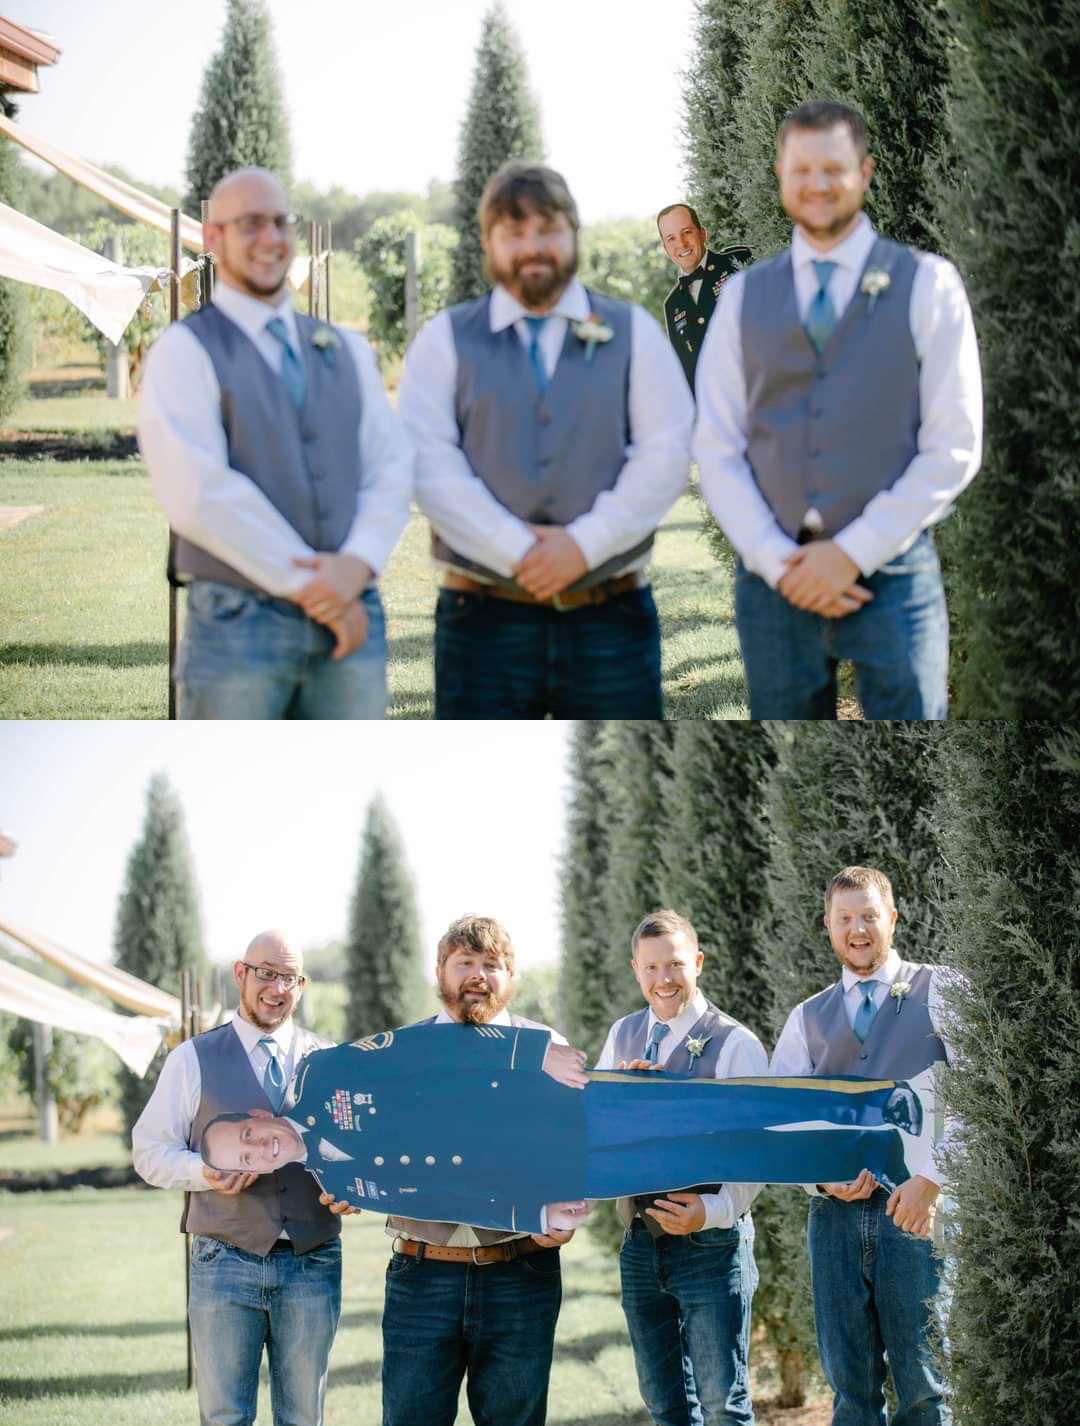 I couldn’t be at my best friend’s wedding, but he still included me